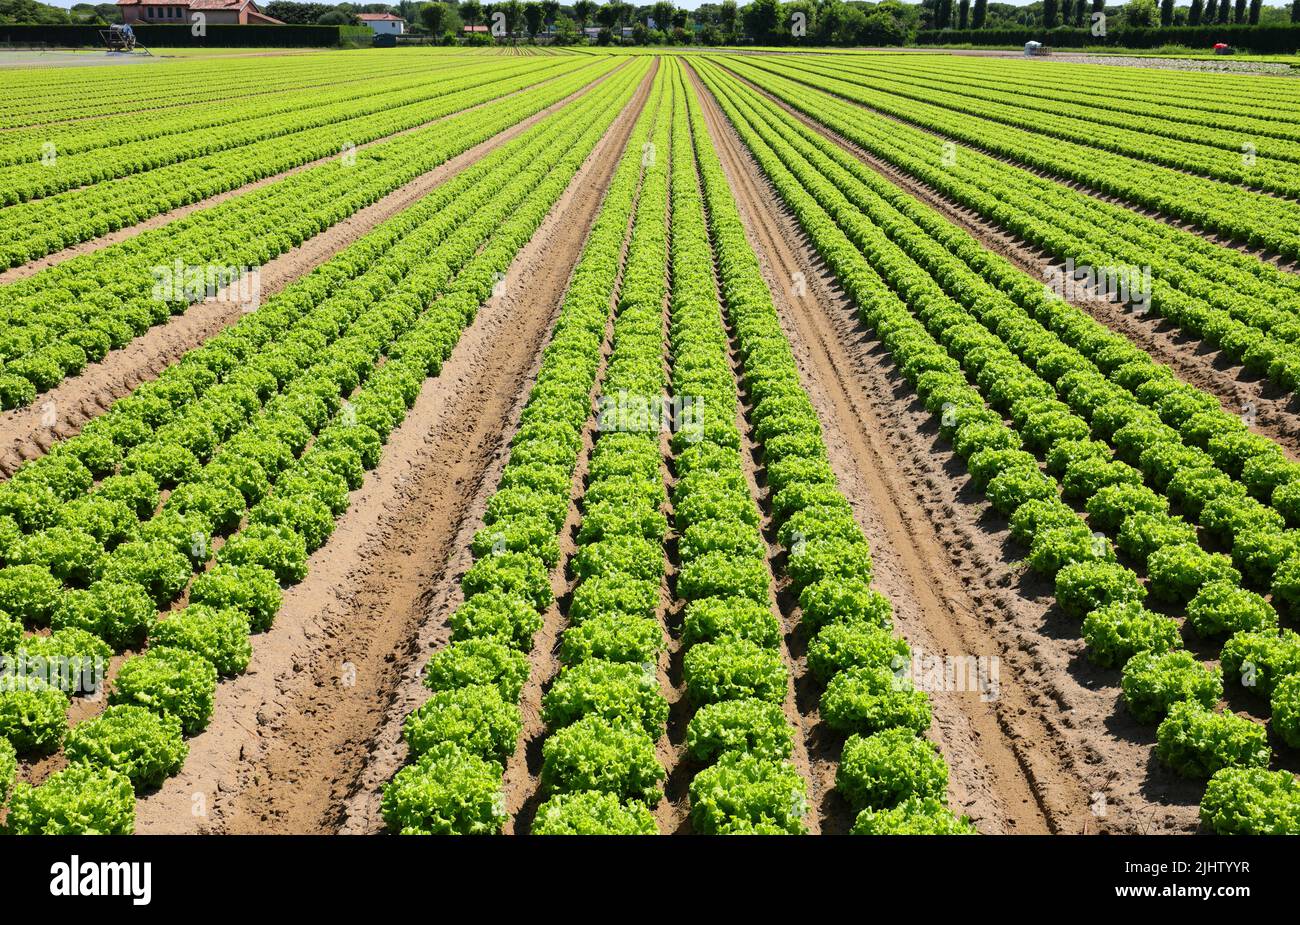 tufts of fresh green lettuce grown in the field with biological techniques without the use of chemical fertilizers with sandy soil to promote growth w Stock Photo